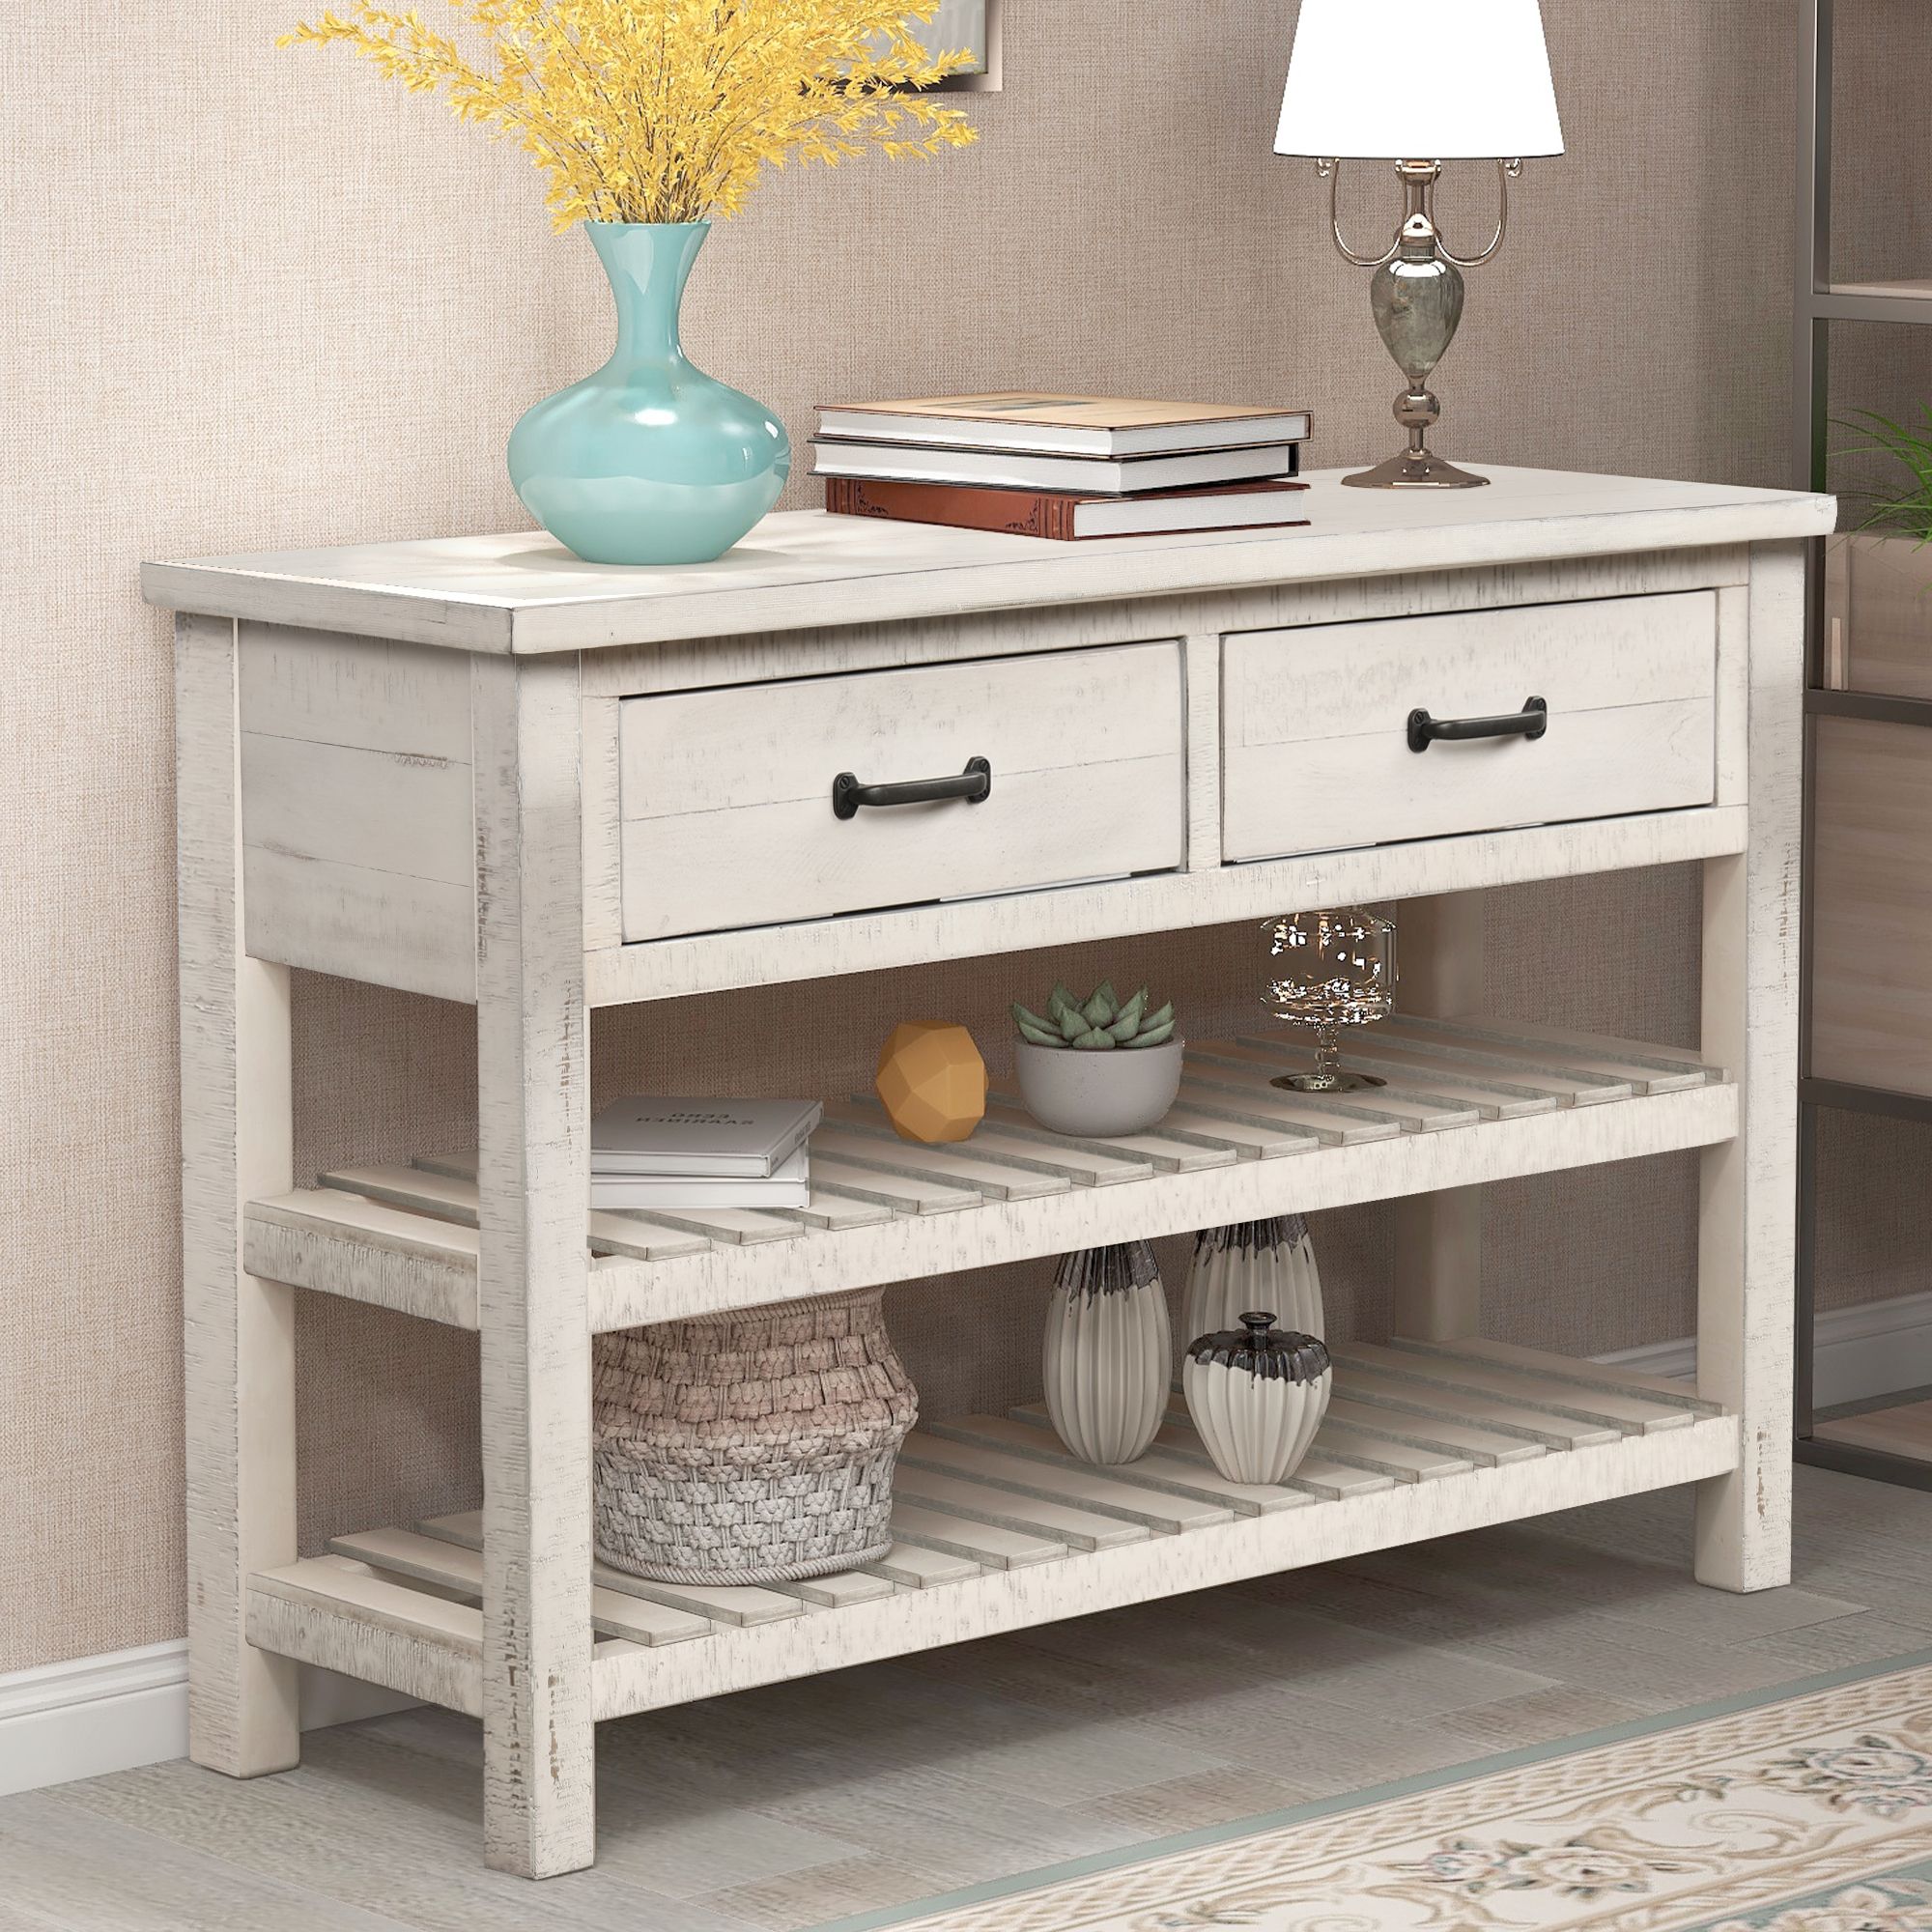 Most Popular Modern Farmhouse Console Tables With Regard To Console Table With Storage Drawers, Btmway 45" Rustic Wood (View 4 of 10)